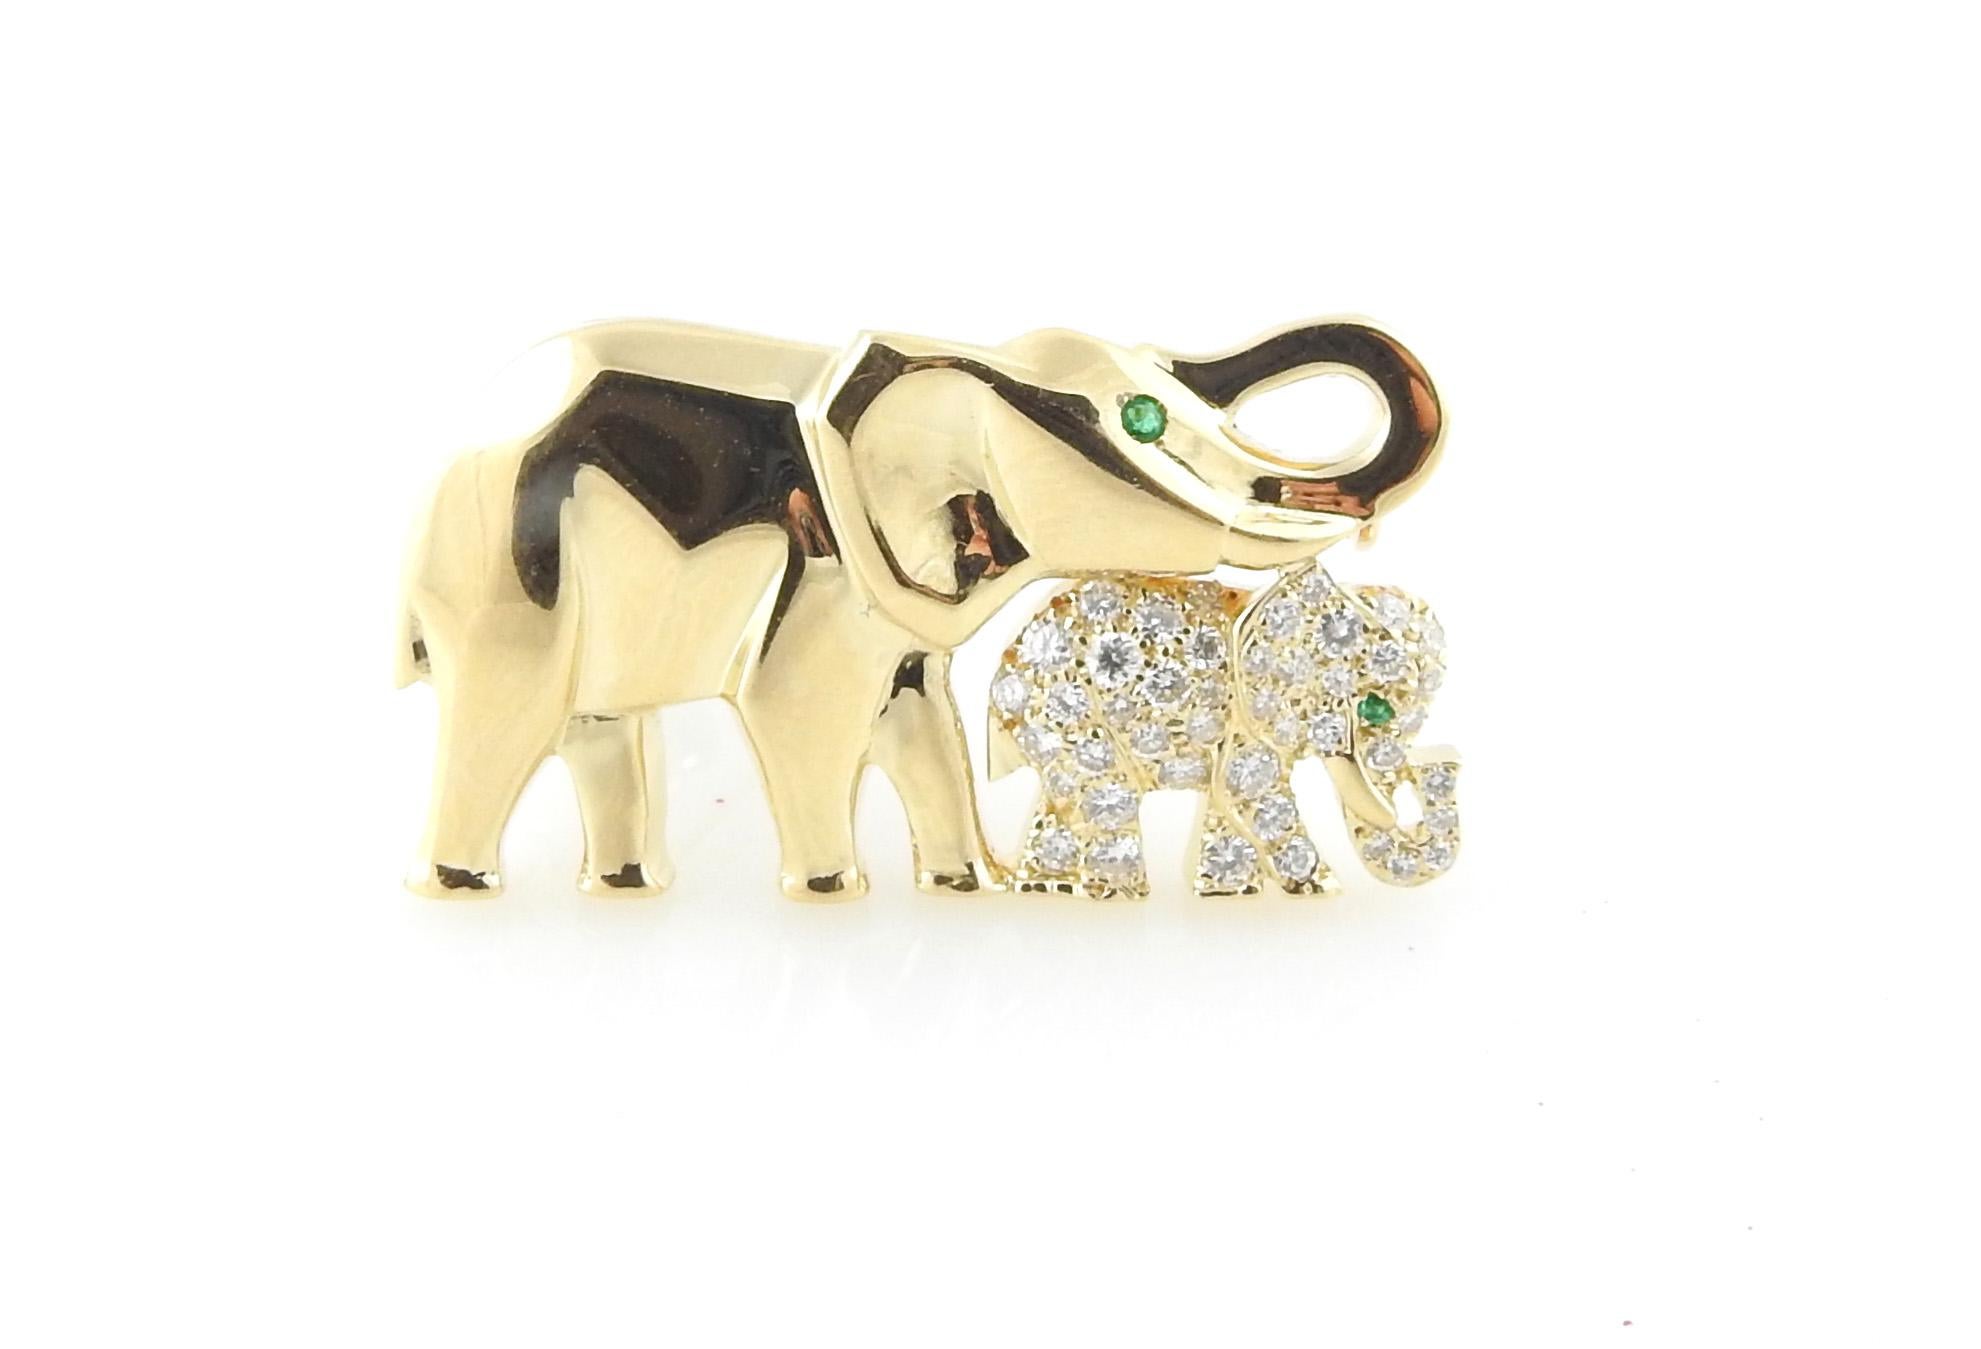 Cartier 18K Yellow Gold Mother and Baby Elephant Brooch

This touching Cartier brooch is set in 18K yellow gold. The mother and baby elephant both feature a genuine emerald eye.

Baby elephant is set with .50cts of round brilliant diamonds. Diamonds